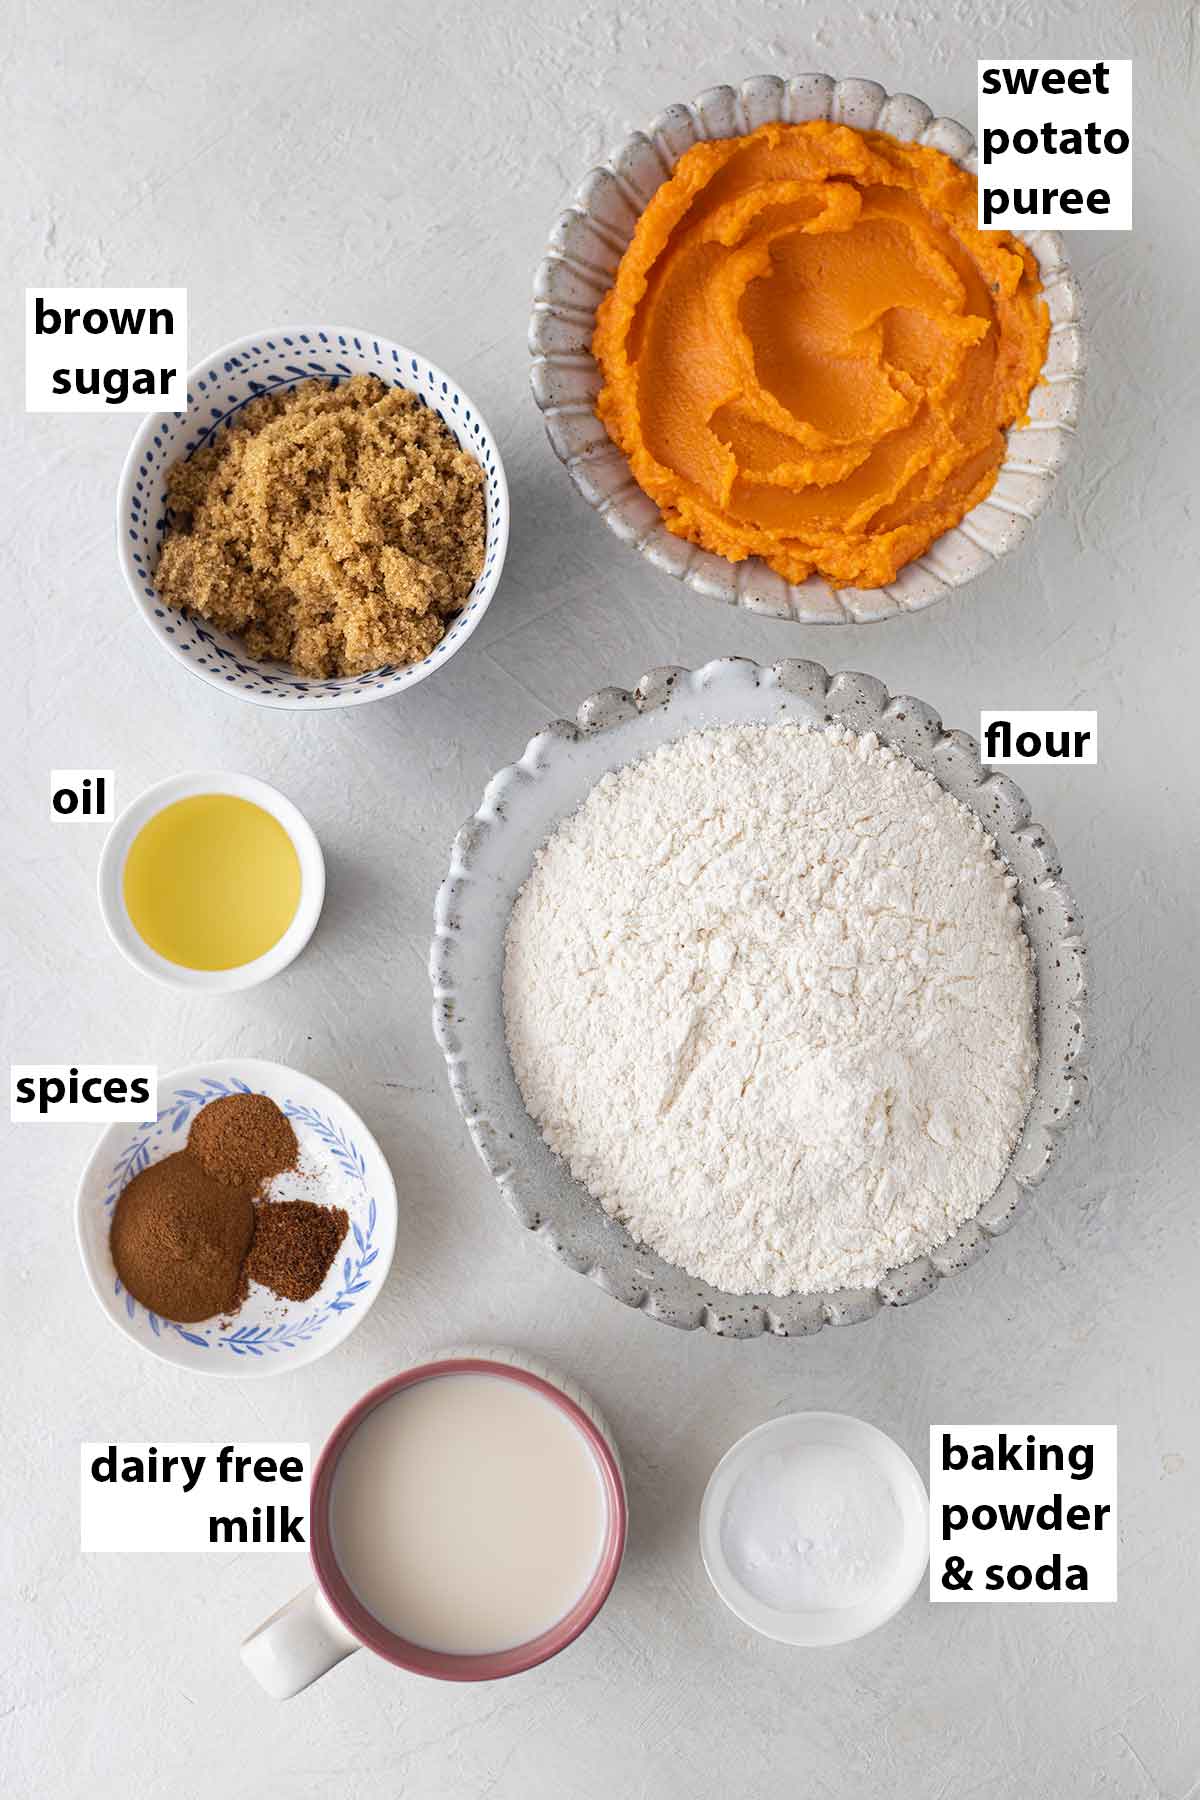 Flatlay of ingredients for the sweet potato cake.